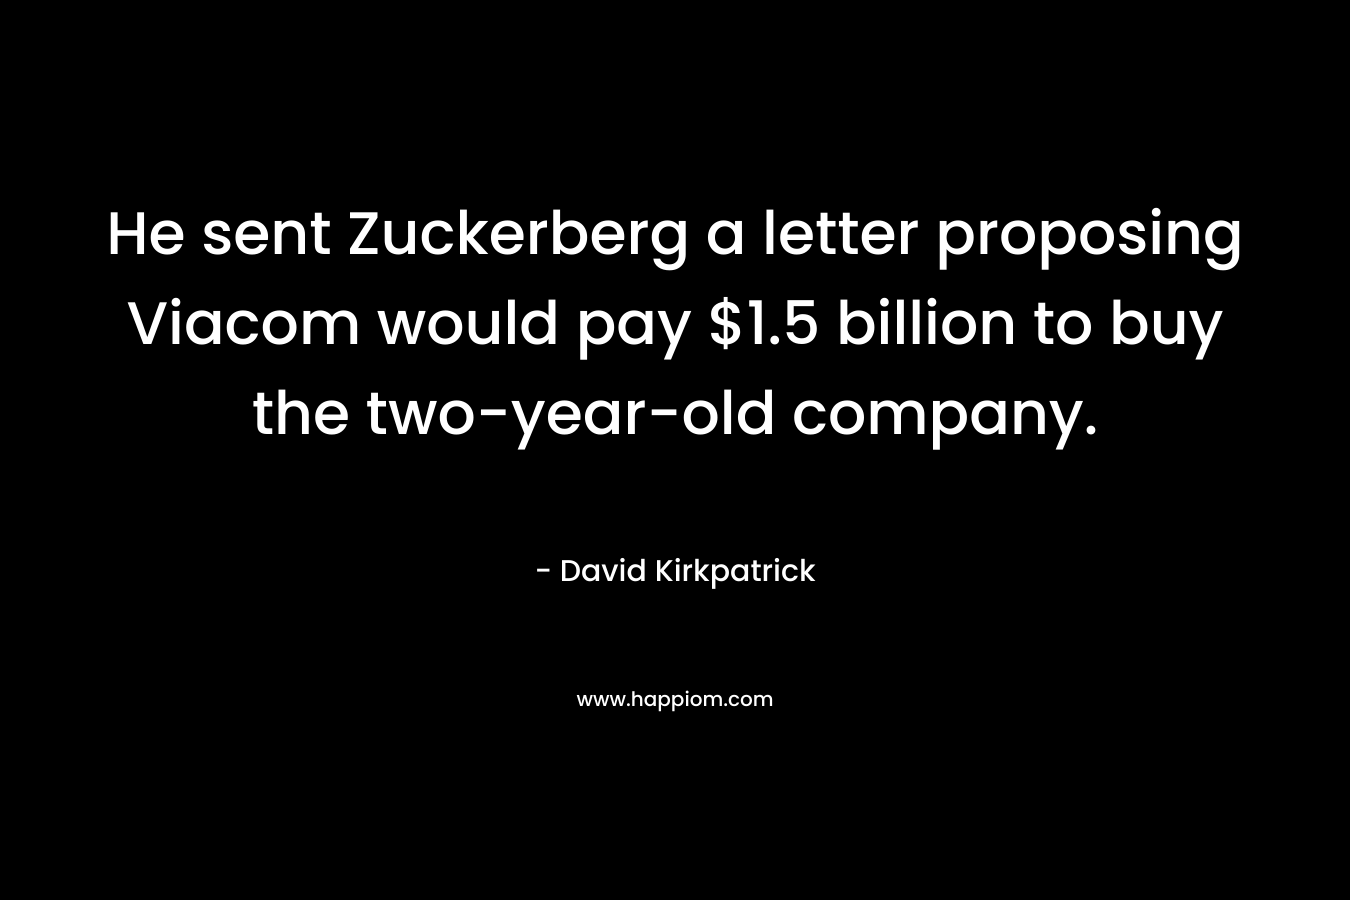 He sent Zuckerberg a letter proposing Viacom would pay $1.5 billion to buy the two-year-old company.